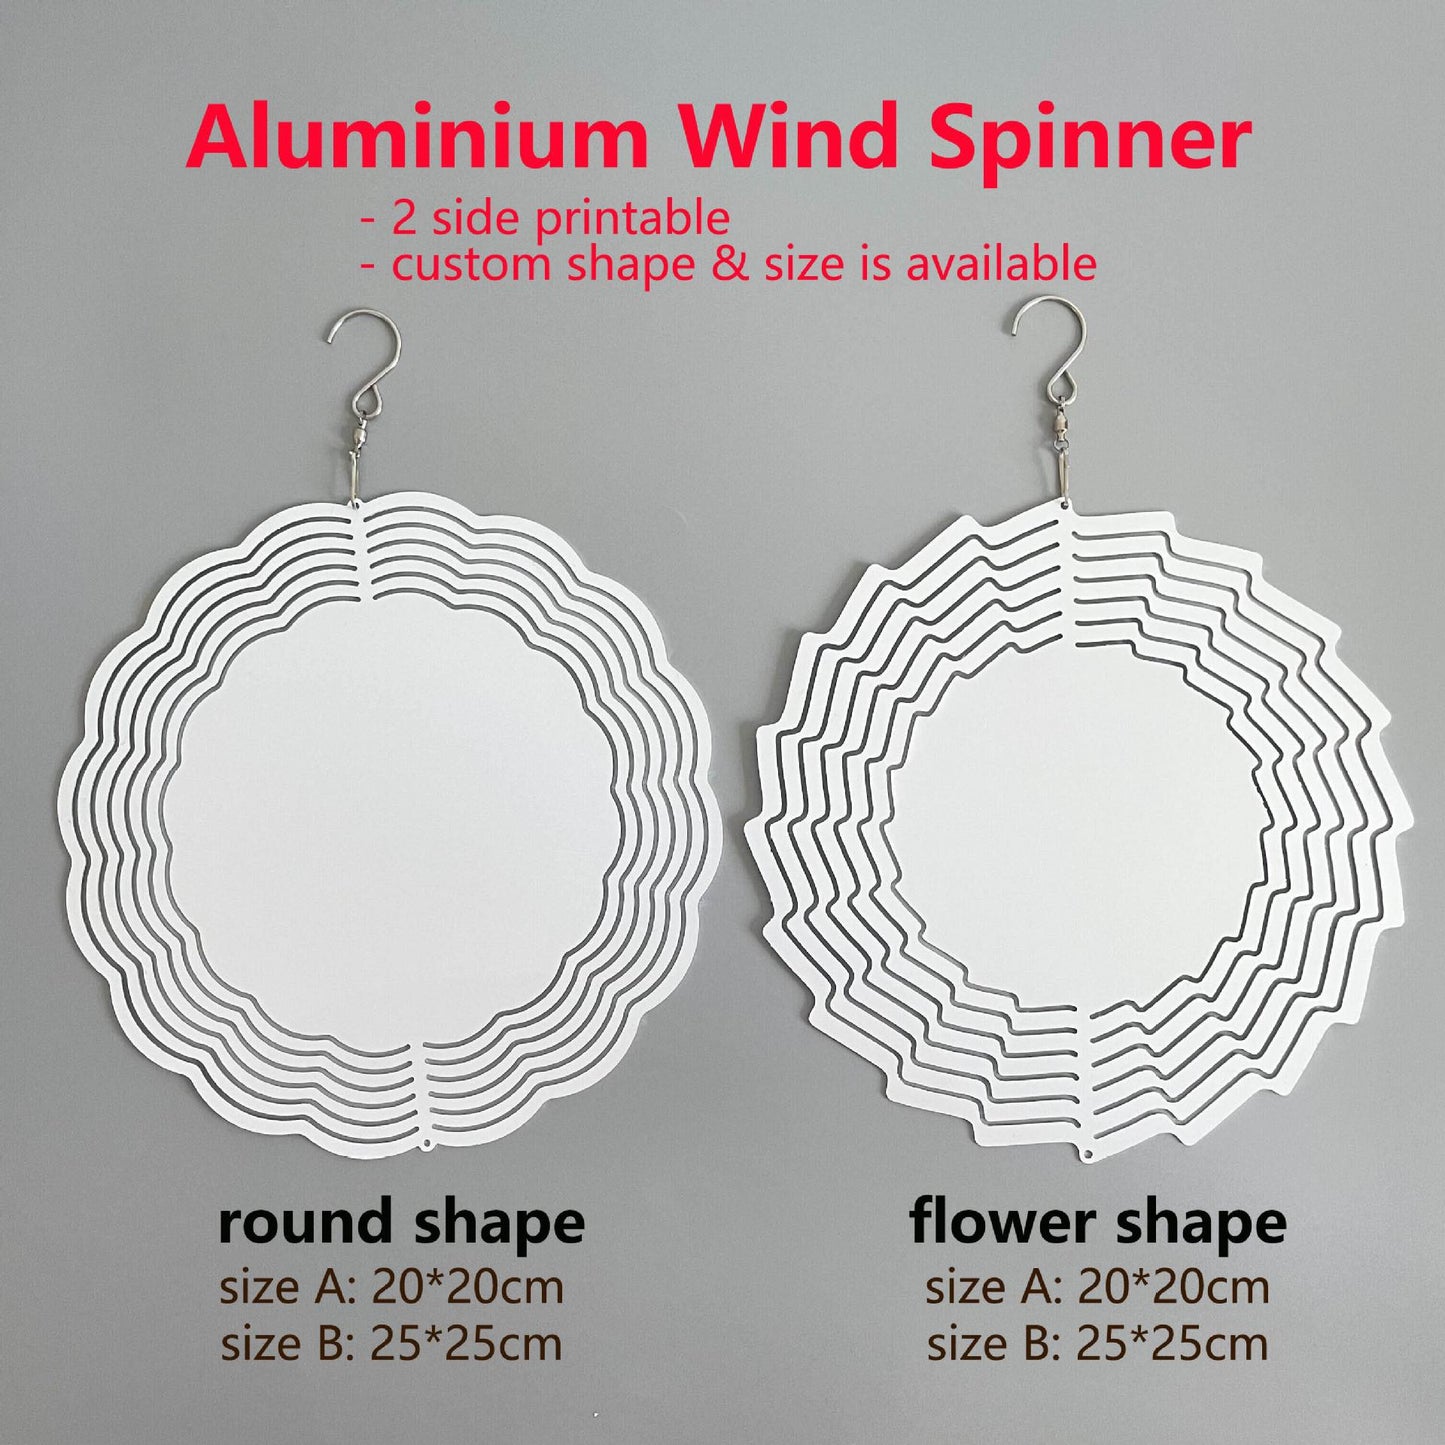 Wholesale Sublimation Wind Spinner Blanks 26 shapes 3 Inch 8 Inch 10 Inch In Bulk 3D Aluminum Metal Wind Spinners for Yard and Garden Indoor Outdoor Window Porch Front Door Decoration Round